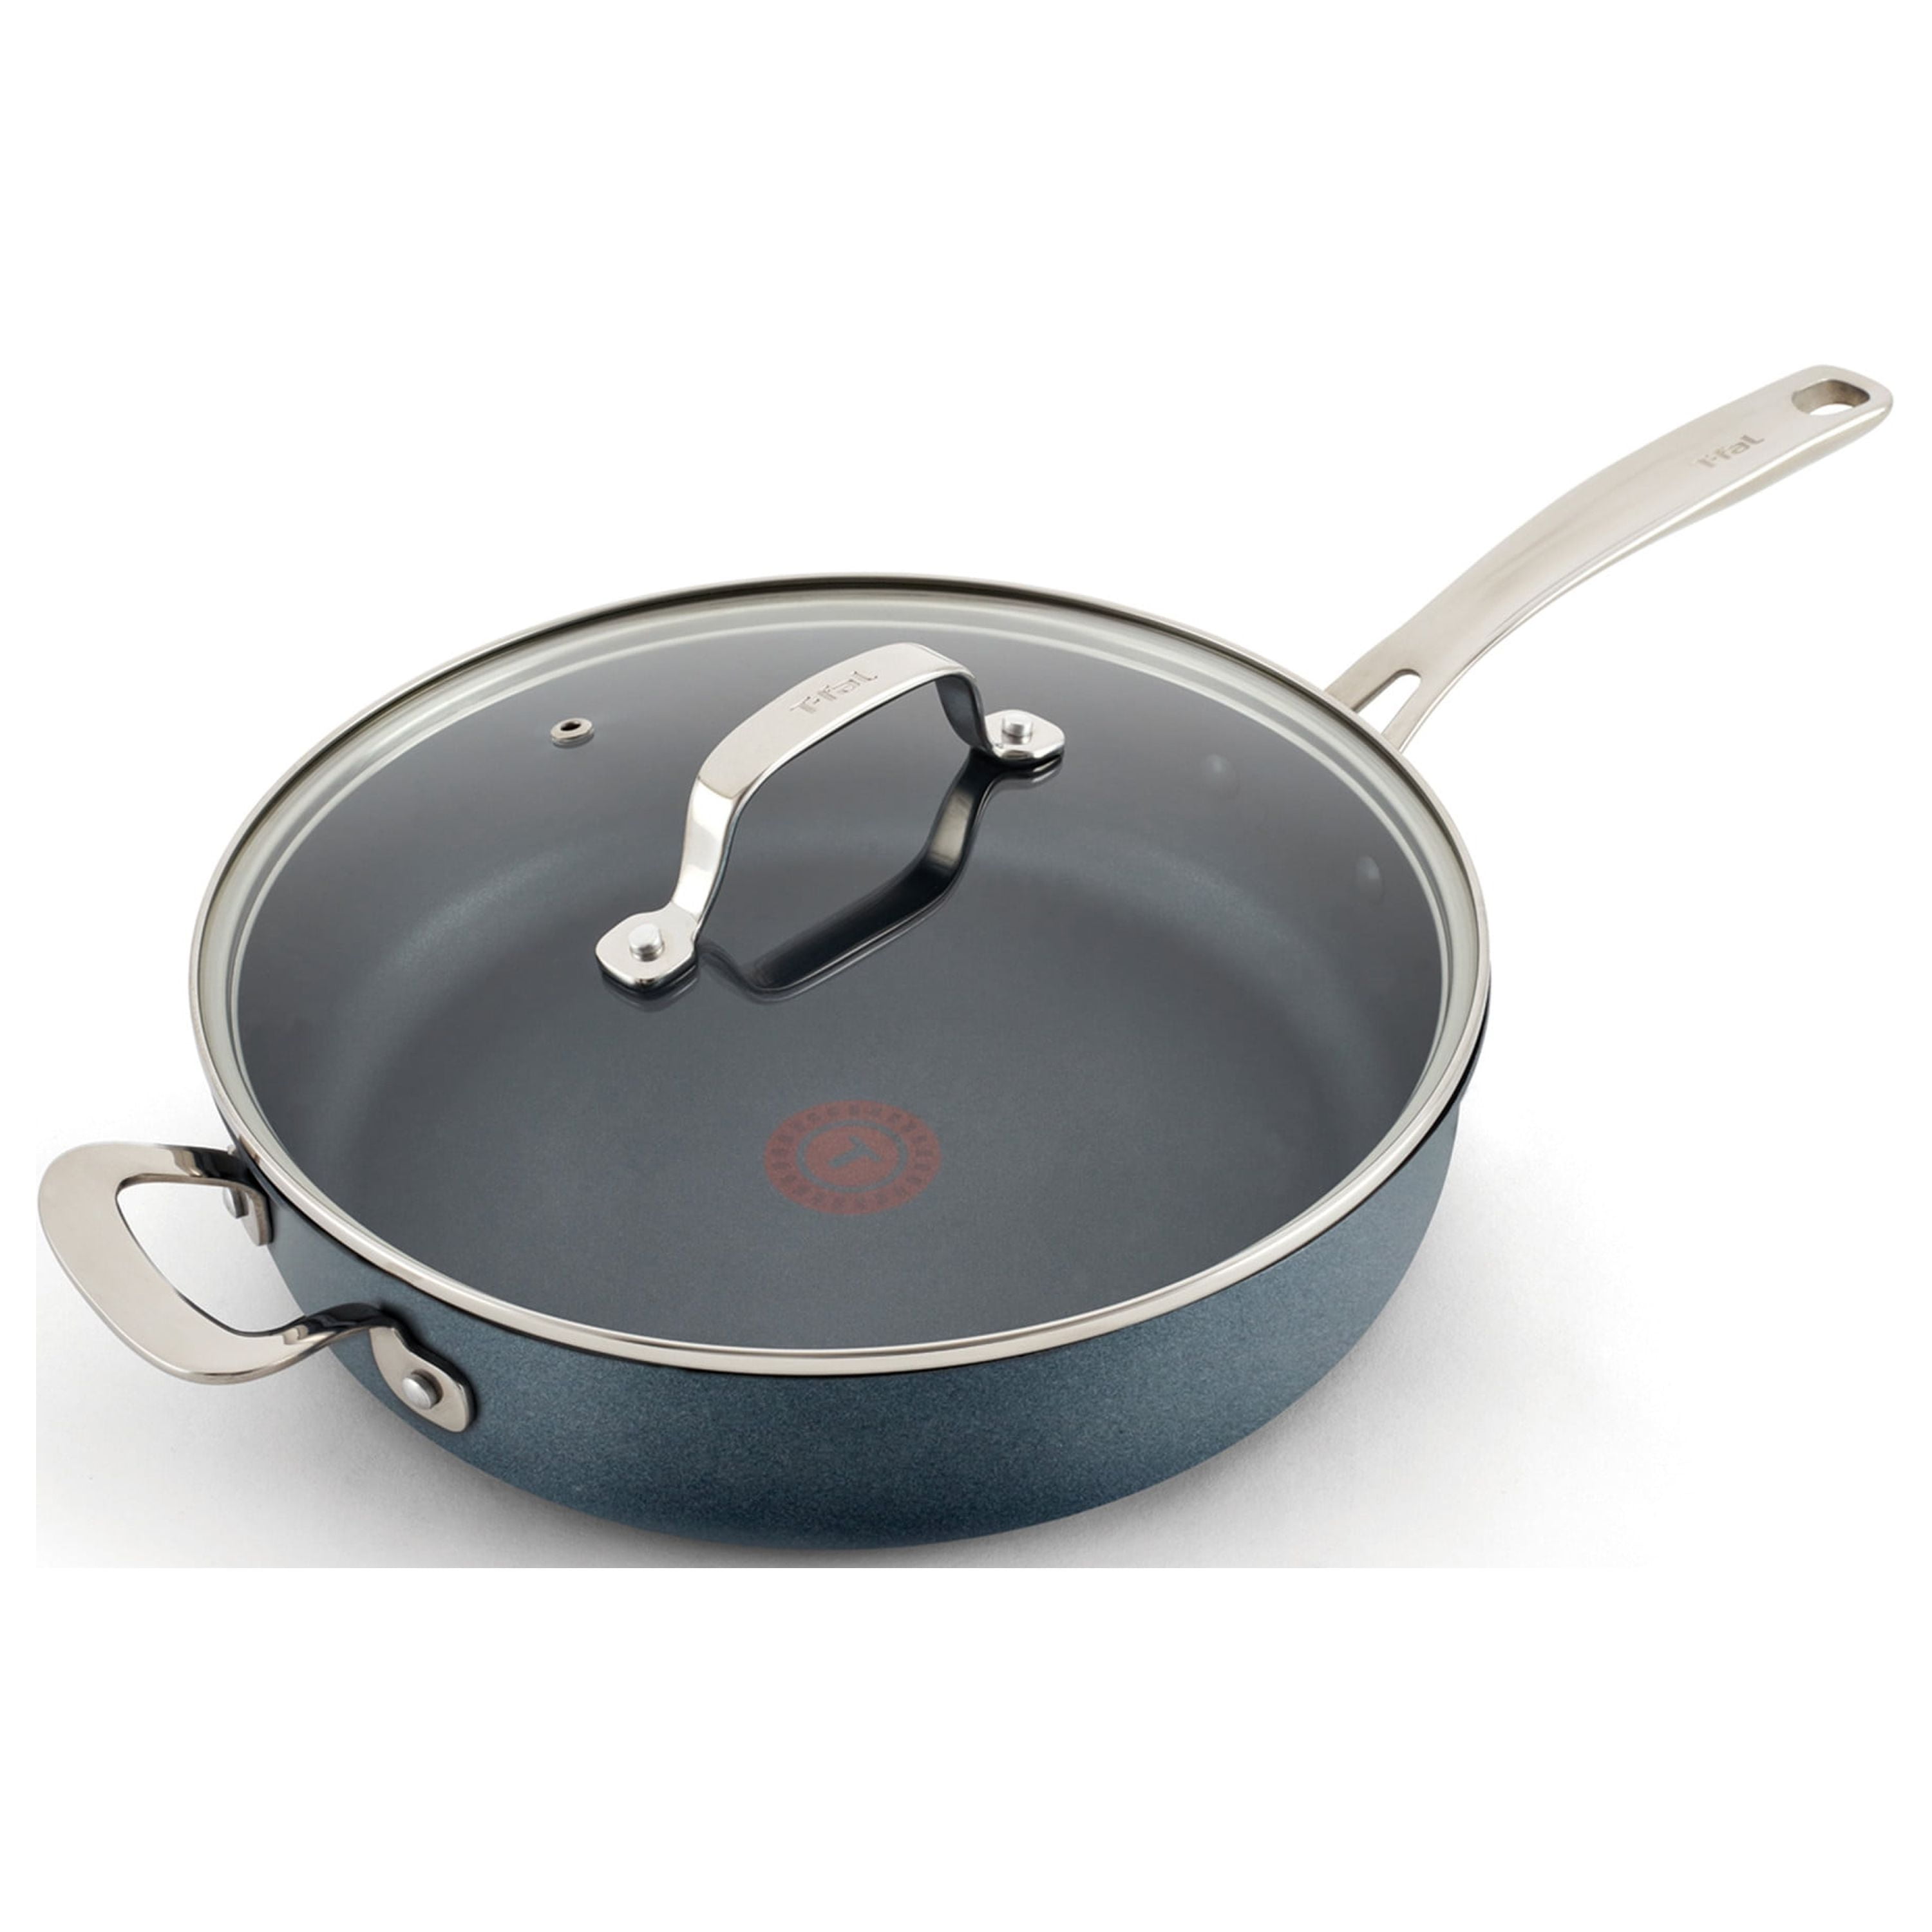 At Home T-fal Specialty Jumbo Non-Stick Wok, 14